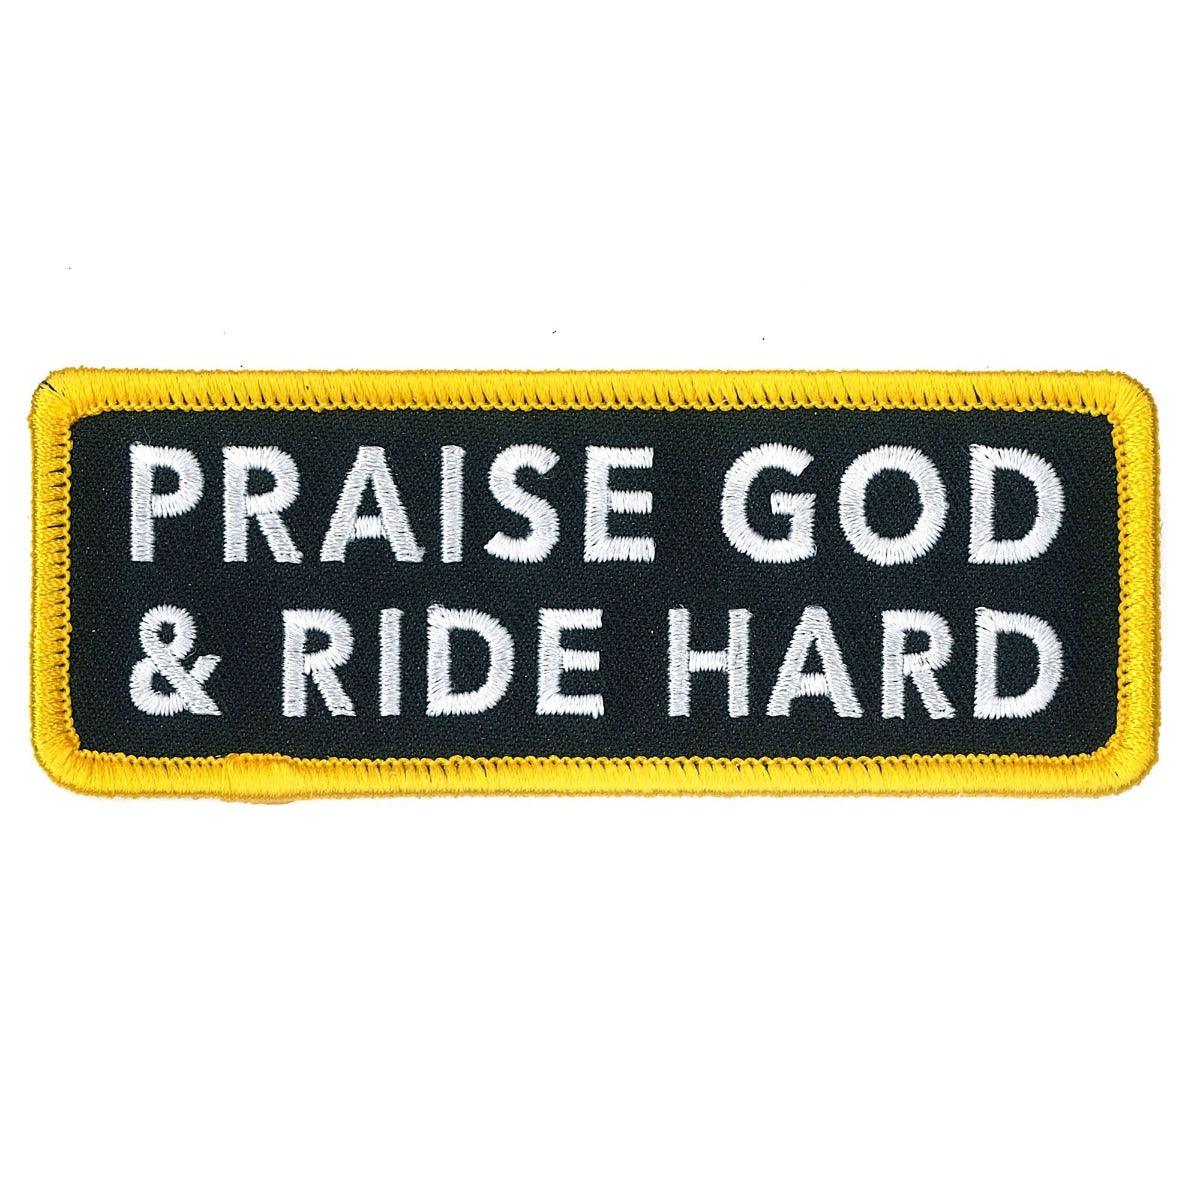 Hot Leathers Patch Praise Ride - American Legend Rider